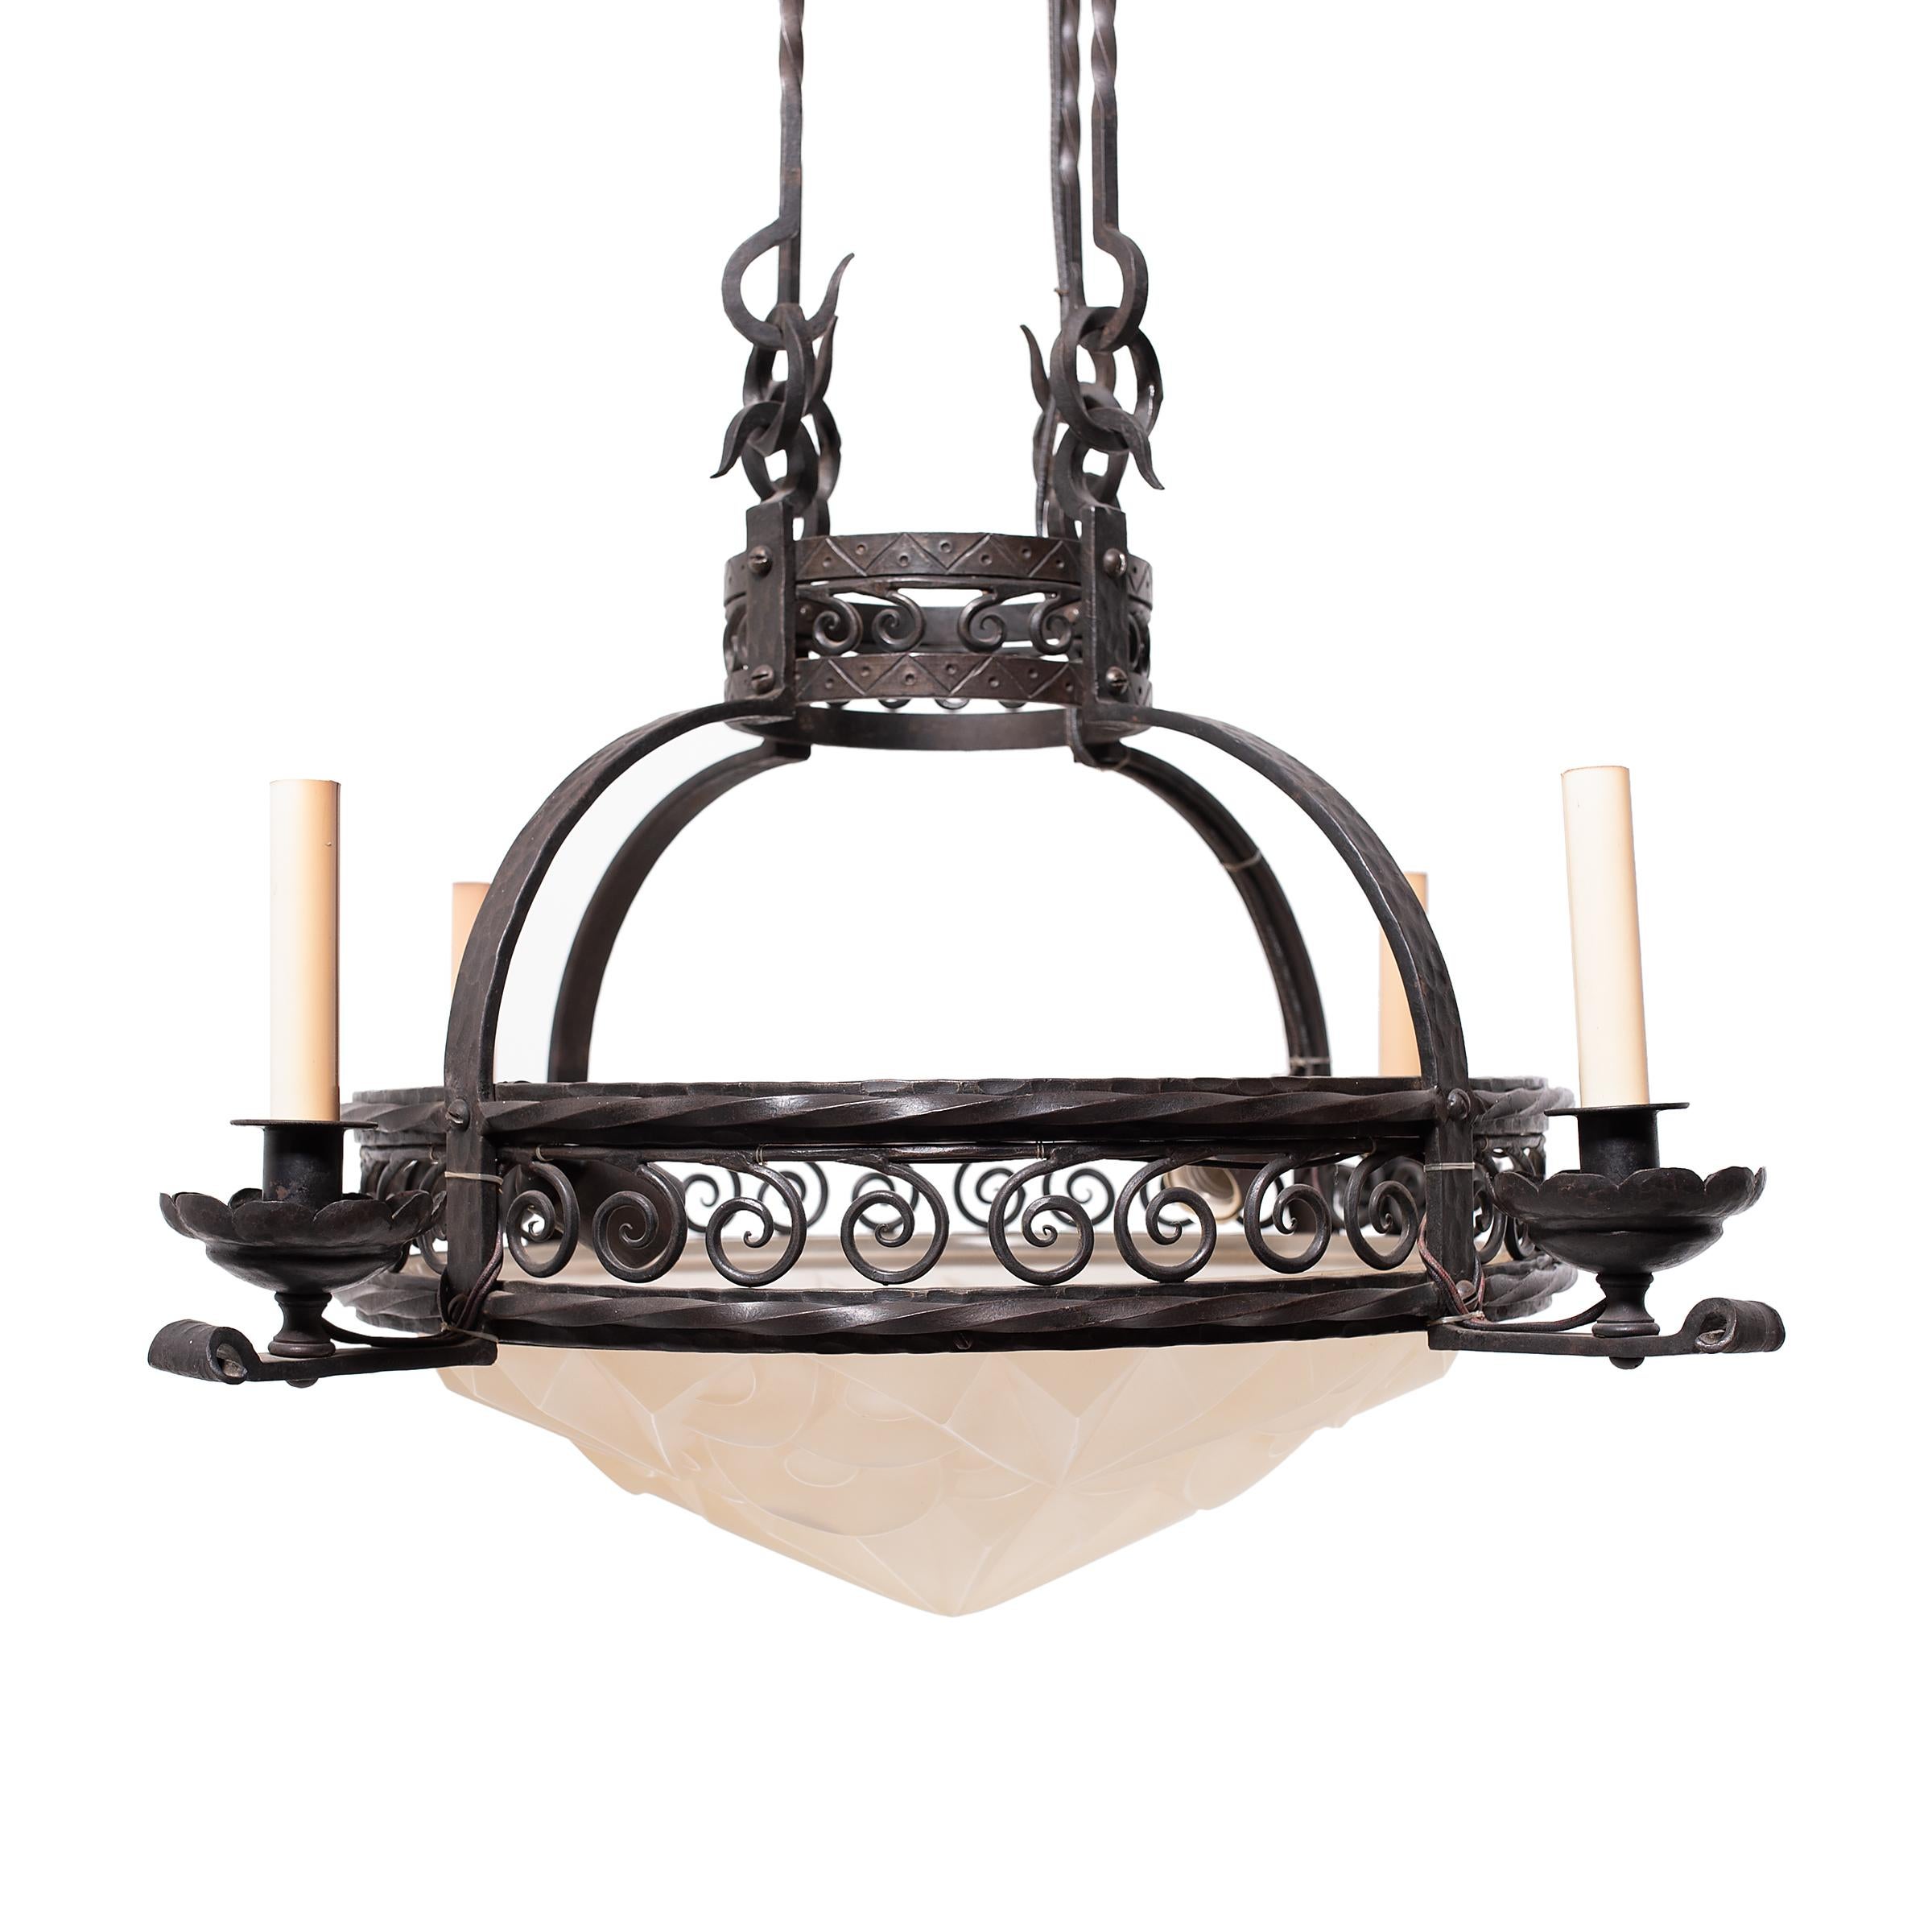 This magnificent frosted glass chandelier combines the soft finish of molded Art Deco glass with the striking forms of a Gothic wrought iron frame. The central domed glass bowl is molded with stylized geometric patterns and sits within a round frame